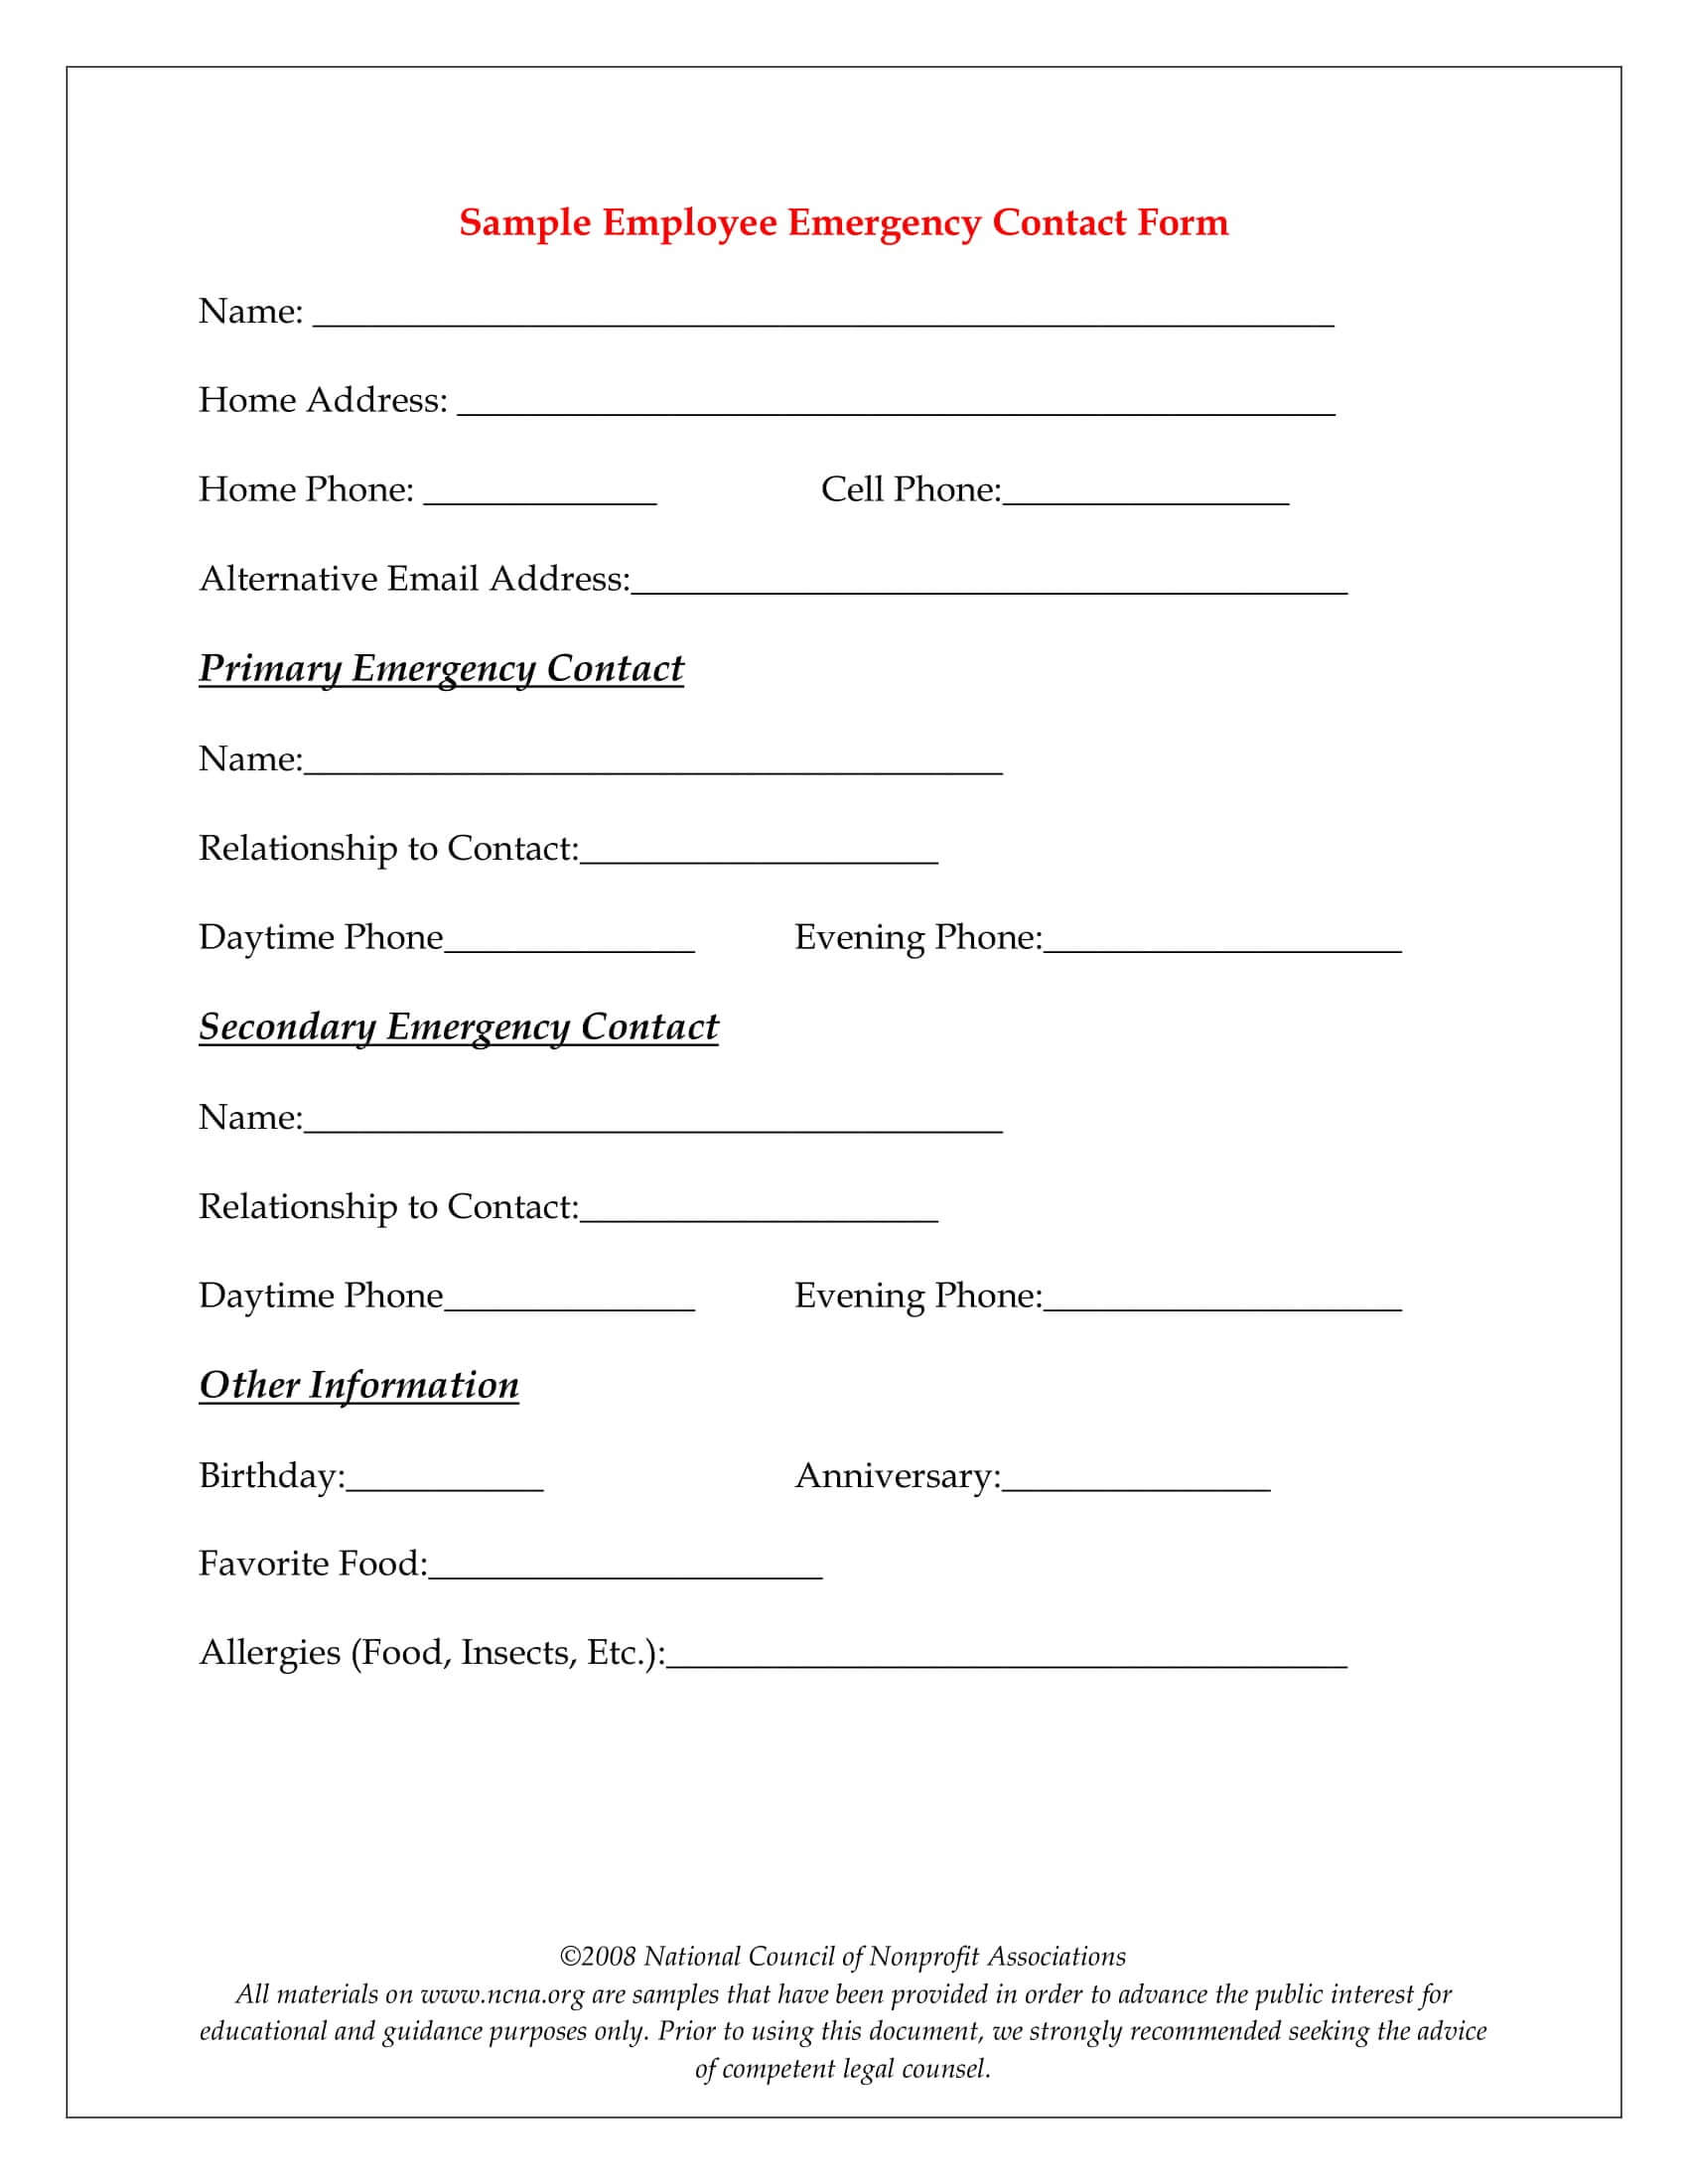 004 Employee Emergency Contact Form Template Sample Ncn Within Emergency Contact Card Template